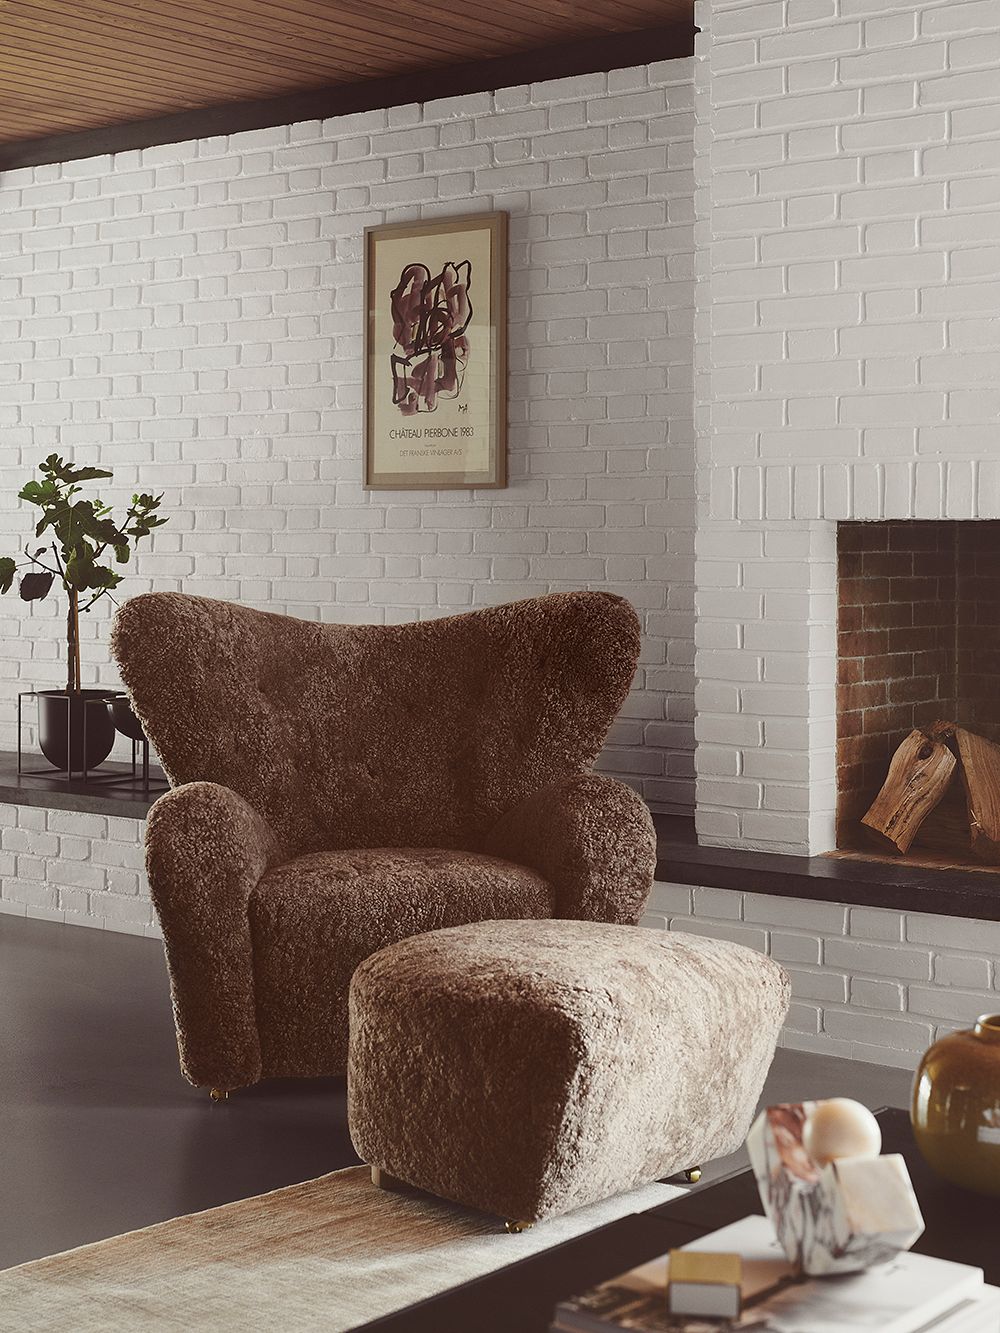 By Lassen  The Tired Man armchair and ottoman